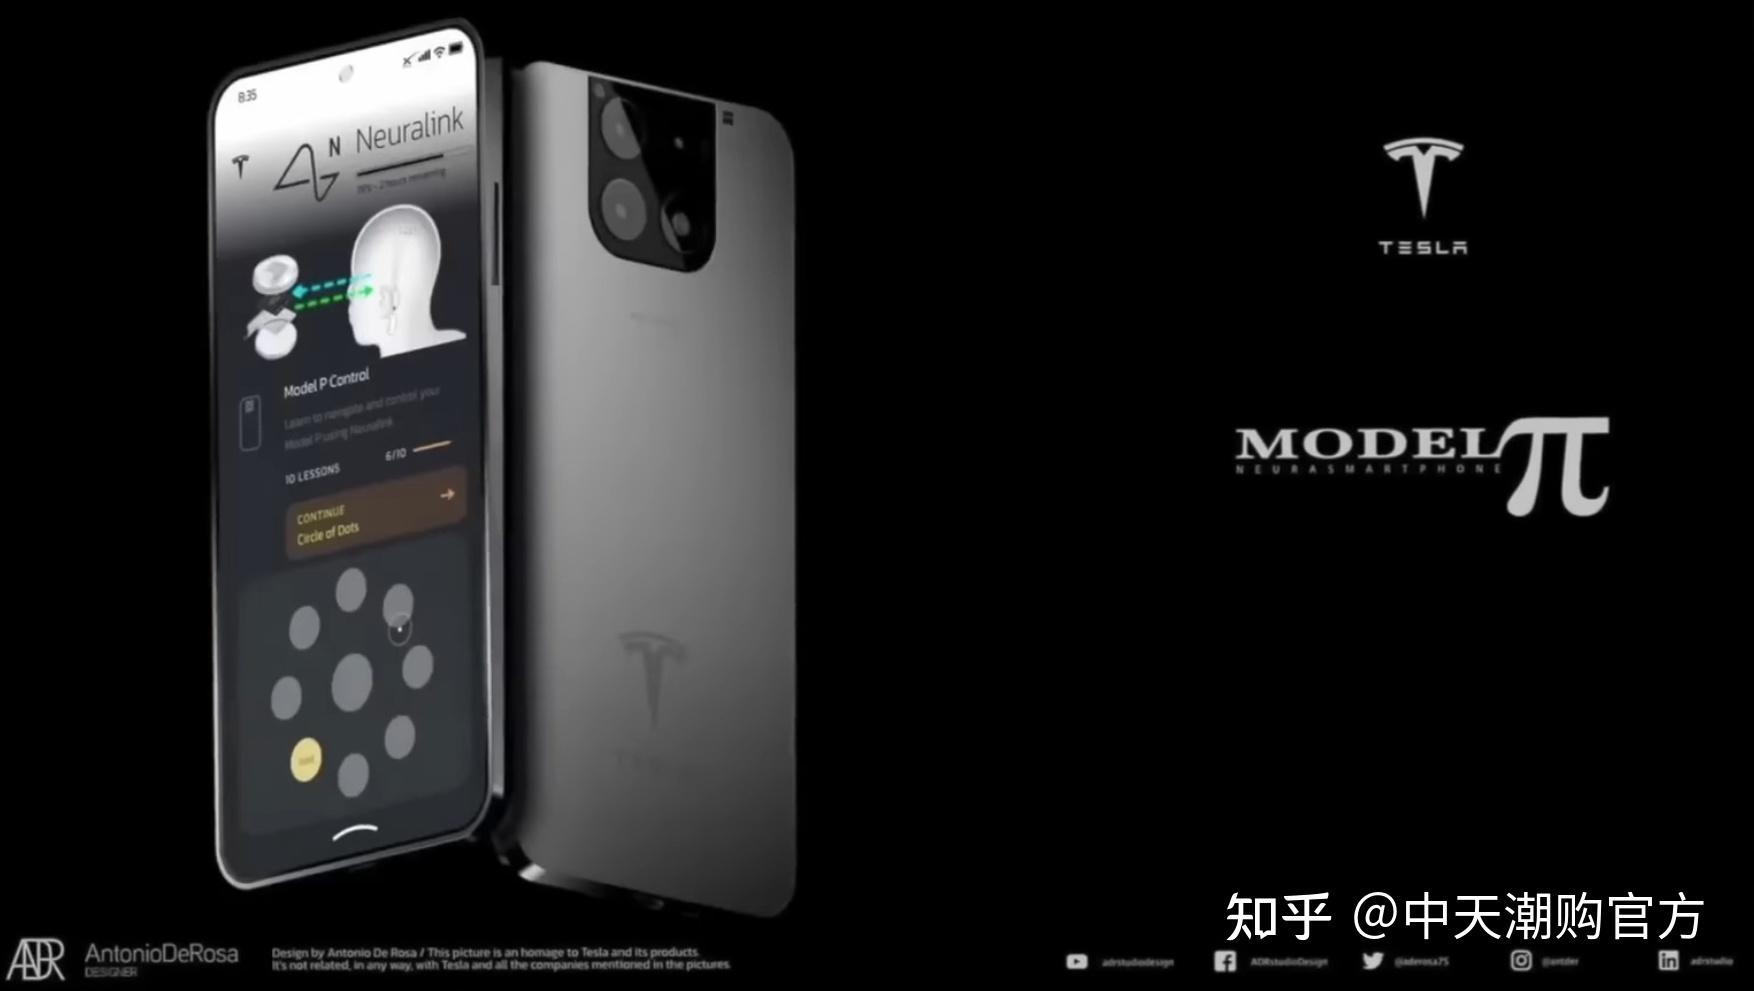 Tesla Model P concept Phone is Connected to Your Brain - Concept Phones